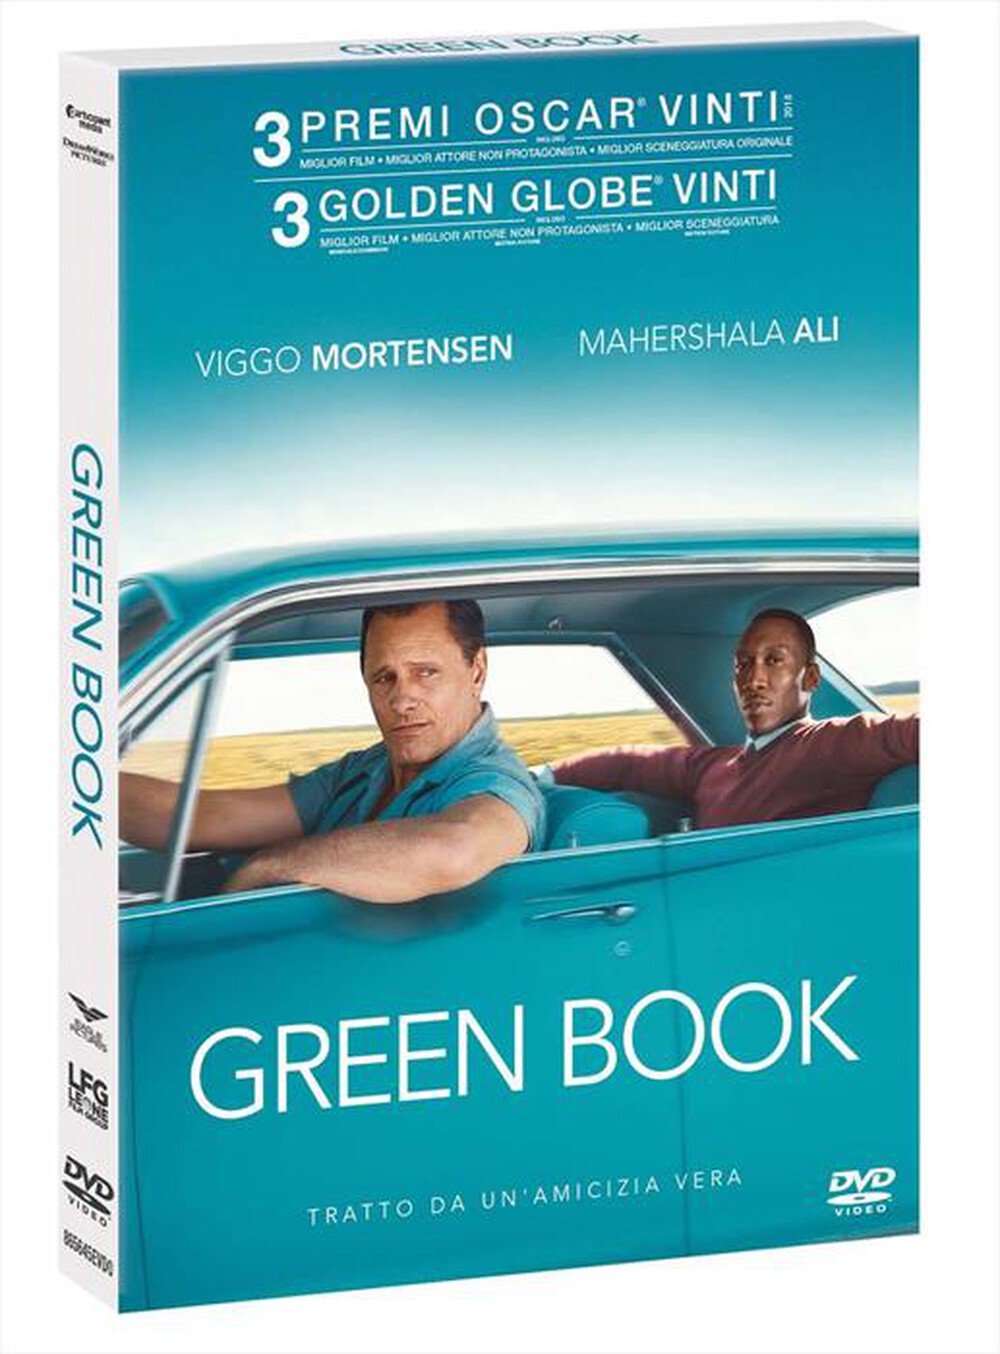 "EAGLE PICTURES - Green Book"